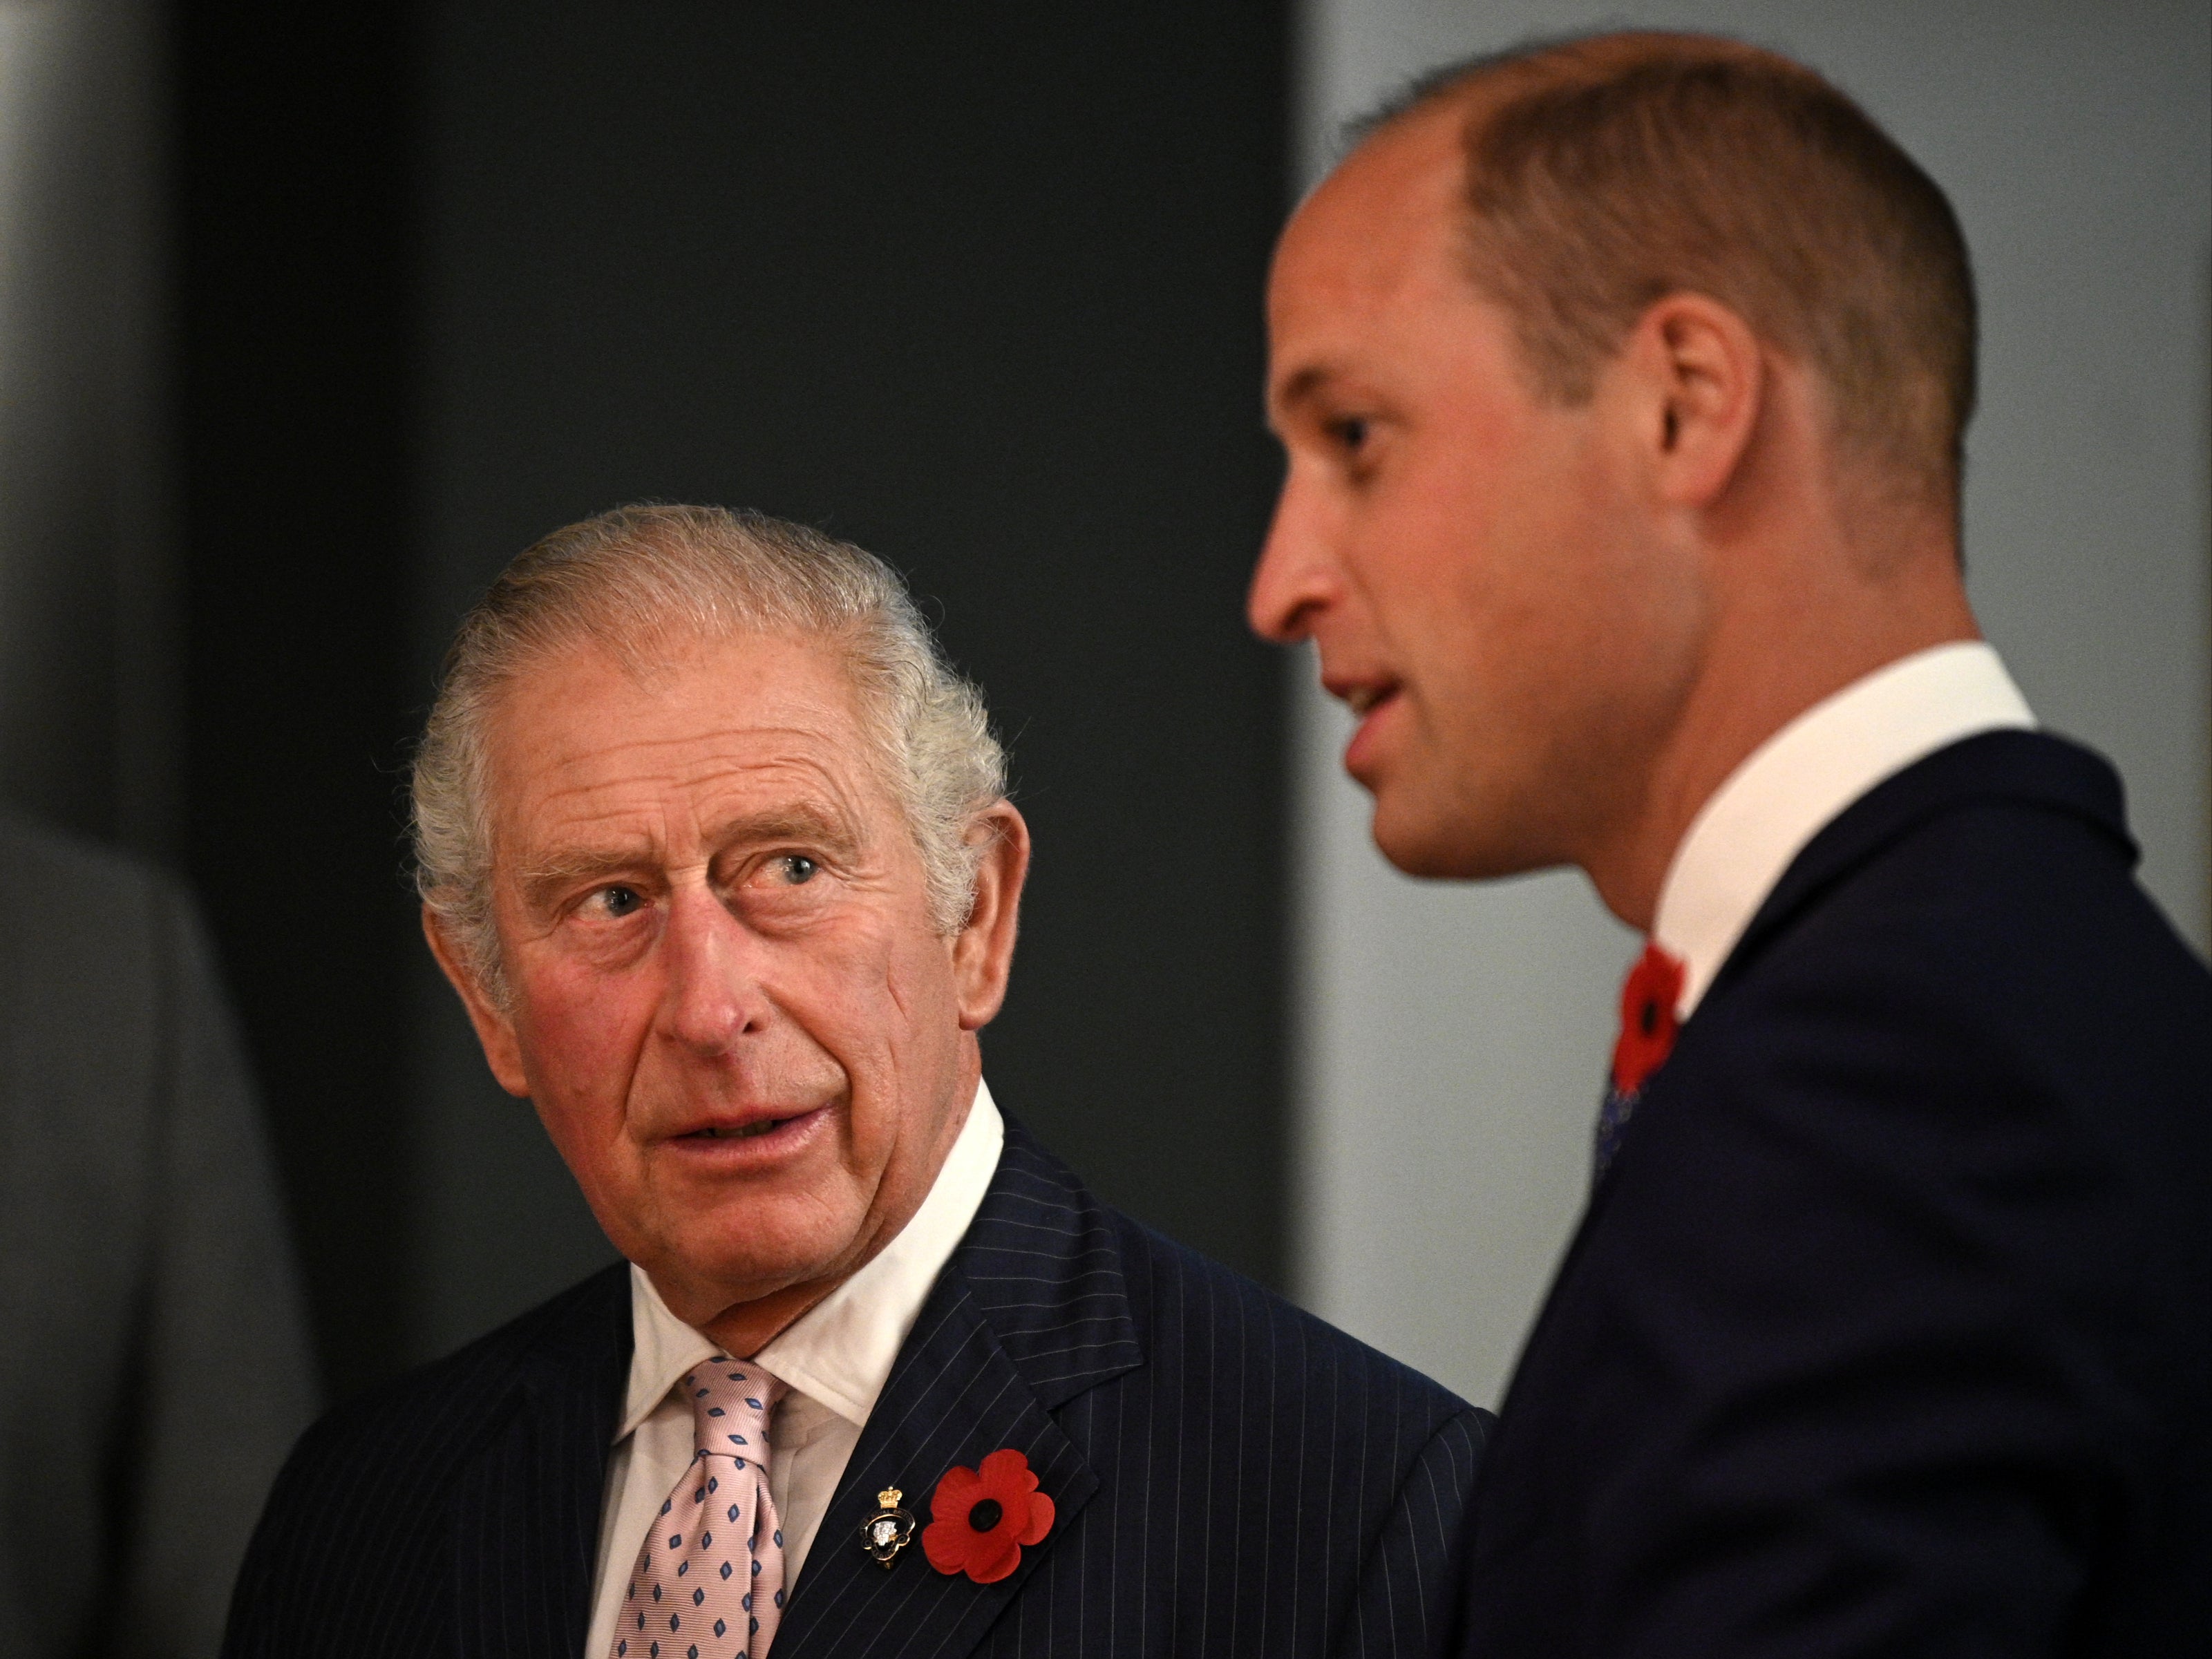 A new royal book claims there is a ‘rift’ between father and son